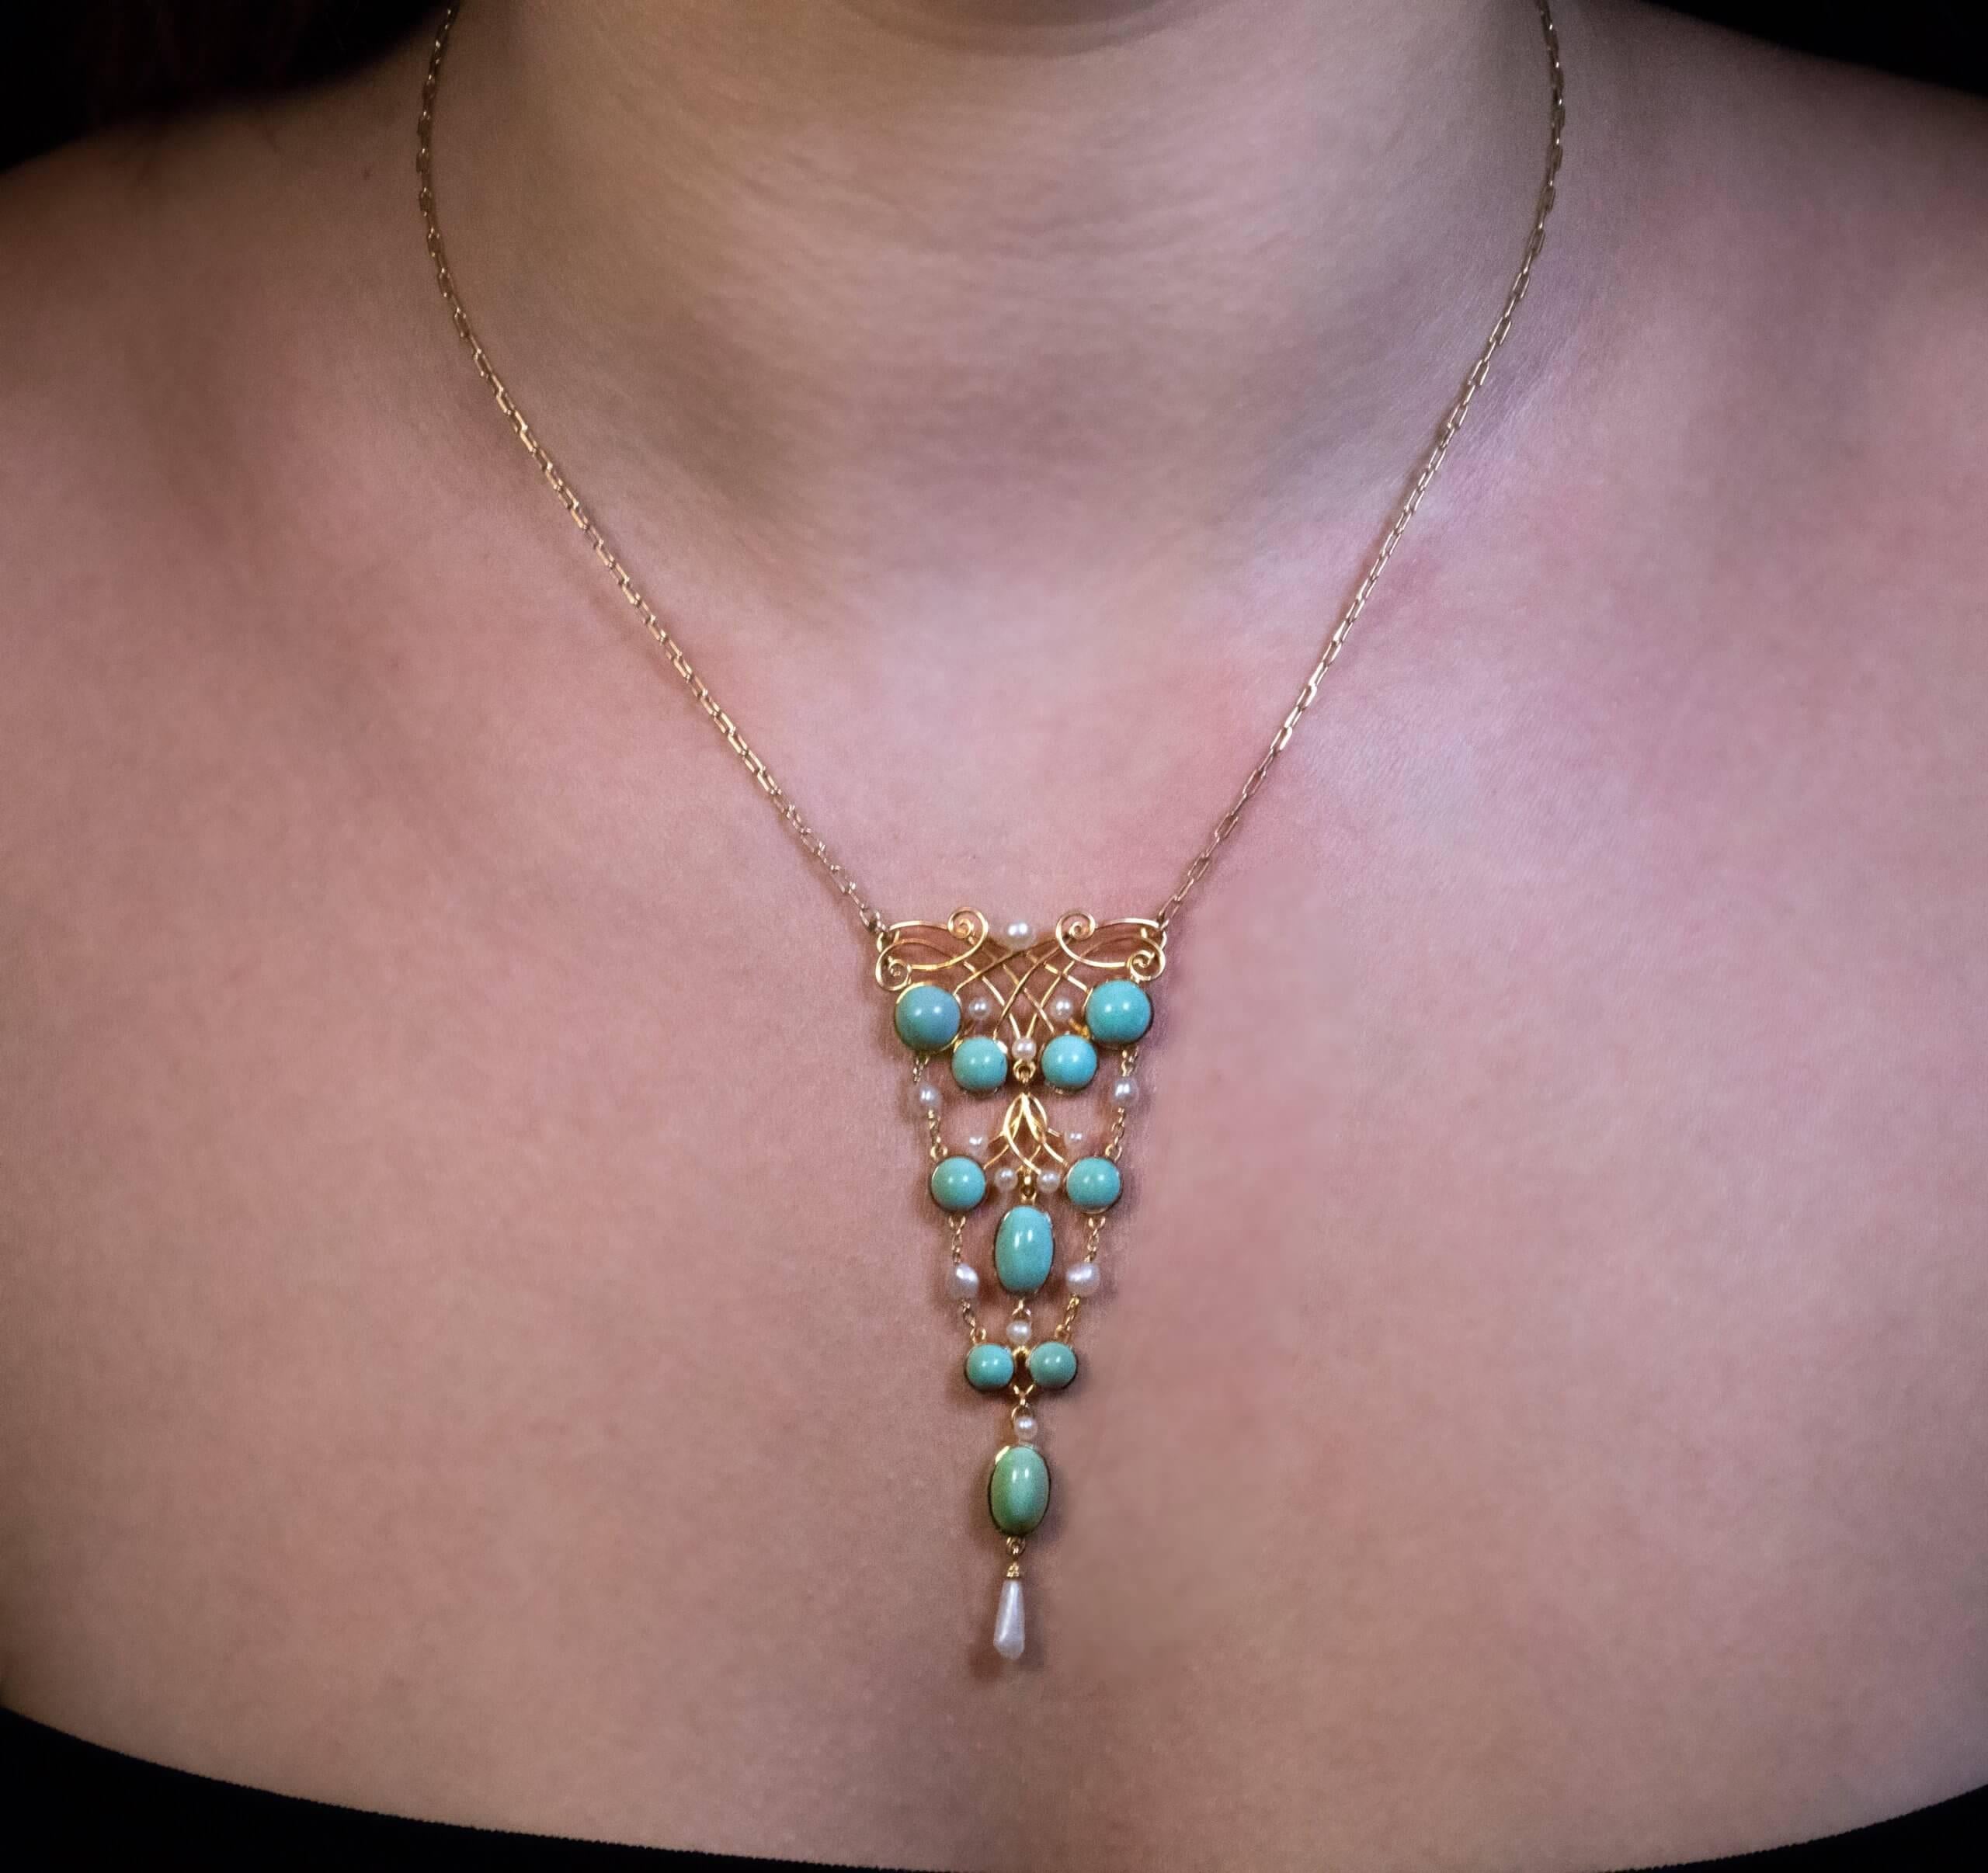 Circa 1910  This Art Nouveau era 14K yellow gold necklace is embellished with turquoise cabochons accented by pearls.  Total length of the pendant is 80 mm (3 1/8 in.)  Width is 32 mm (1 1/4 in.)  Length of the chain is 40 cm (16 2/8 in.)